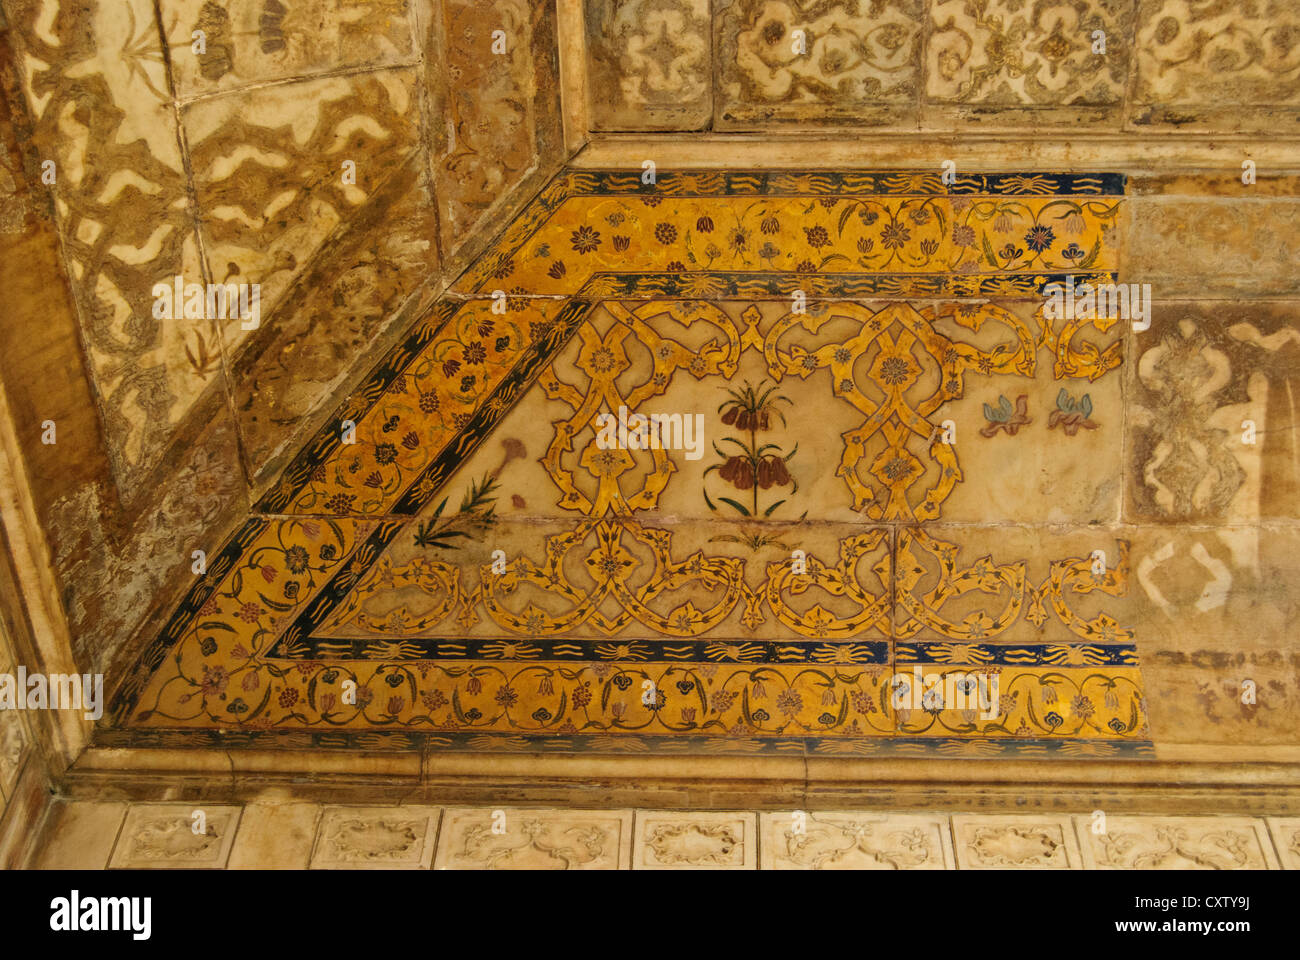 The remaining gold on the roof of one of the buildings in Agra Fort Stock Photo